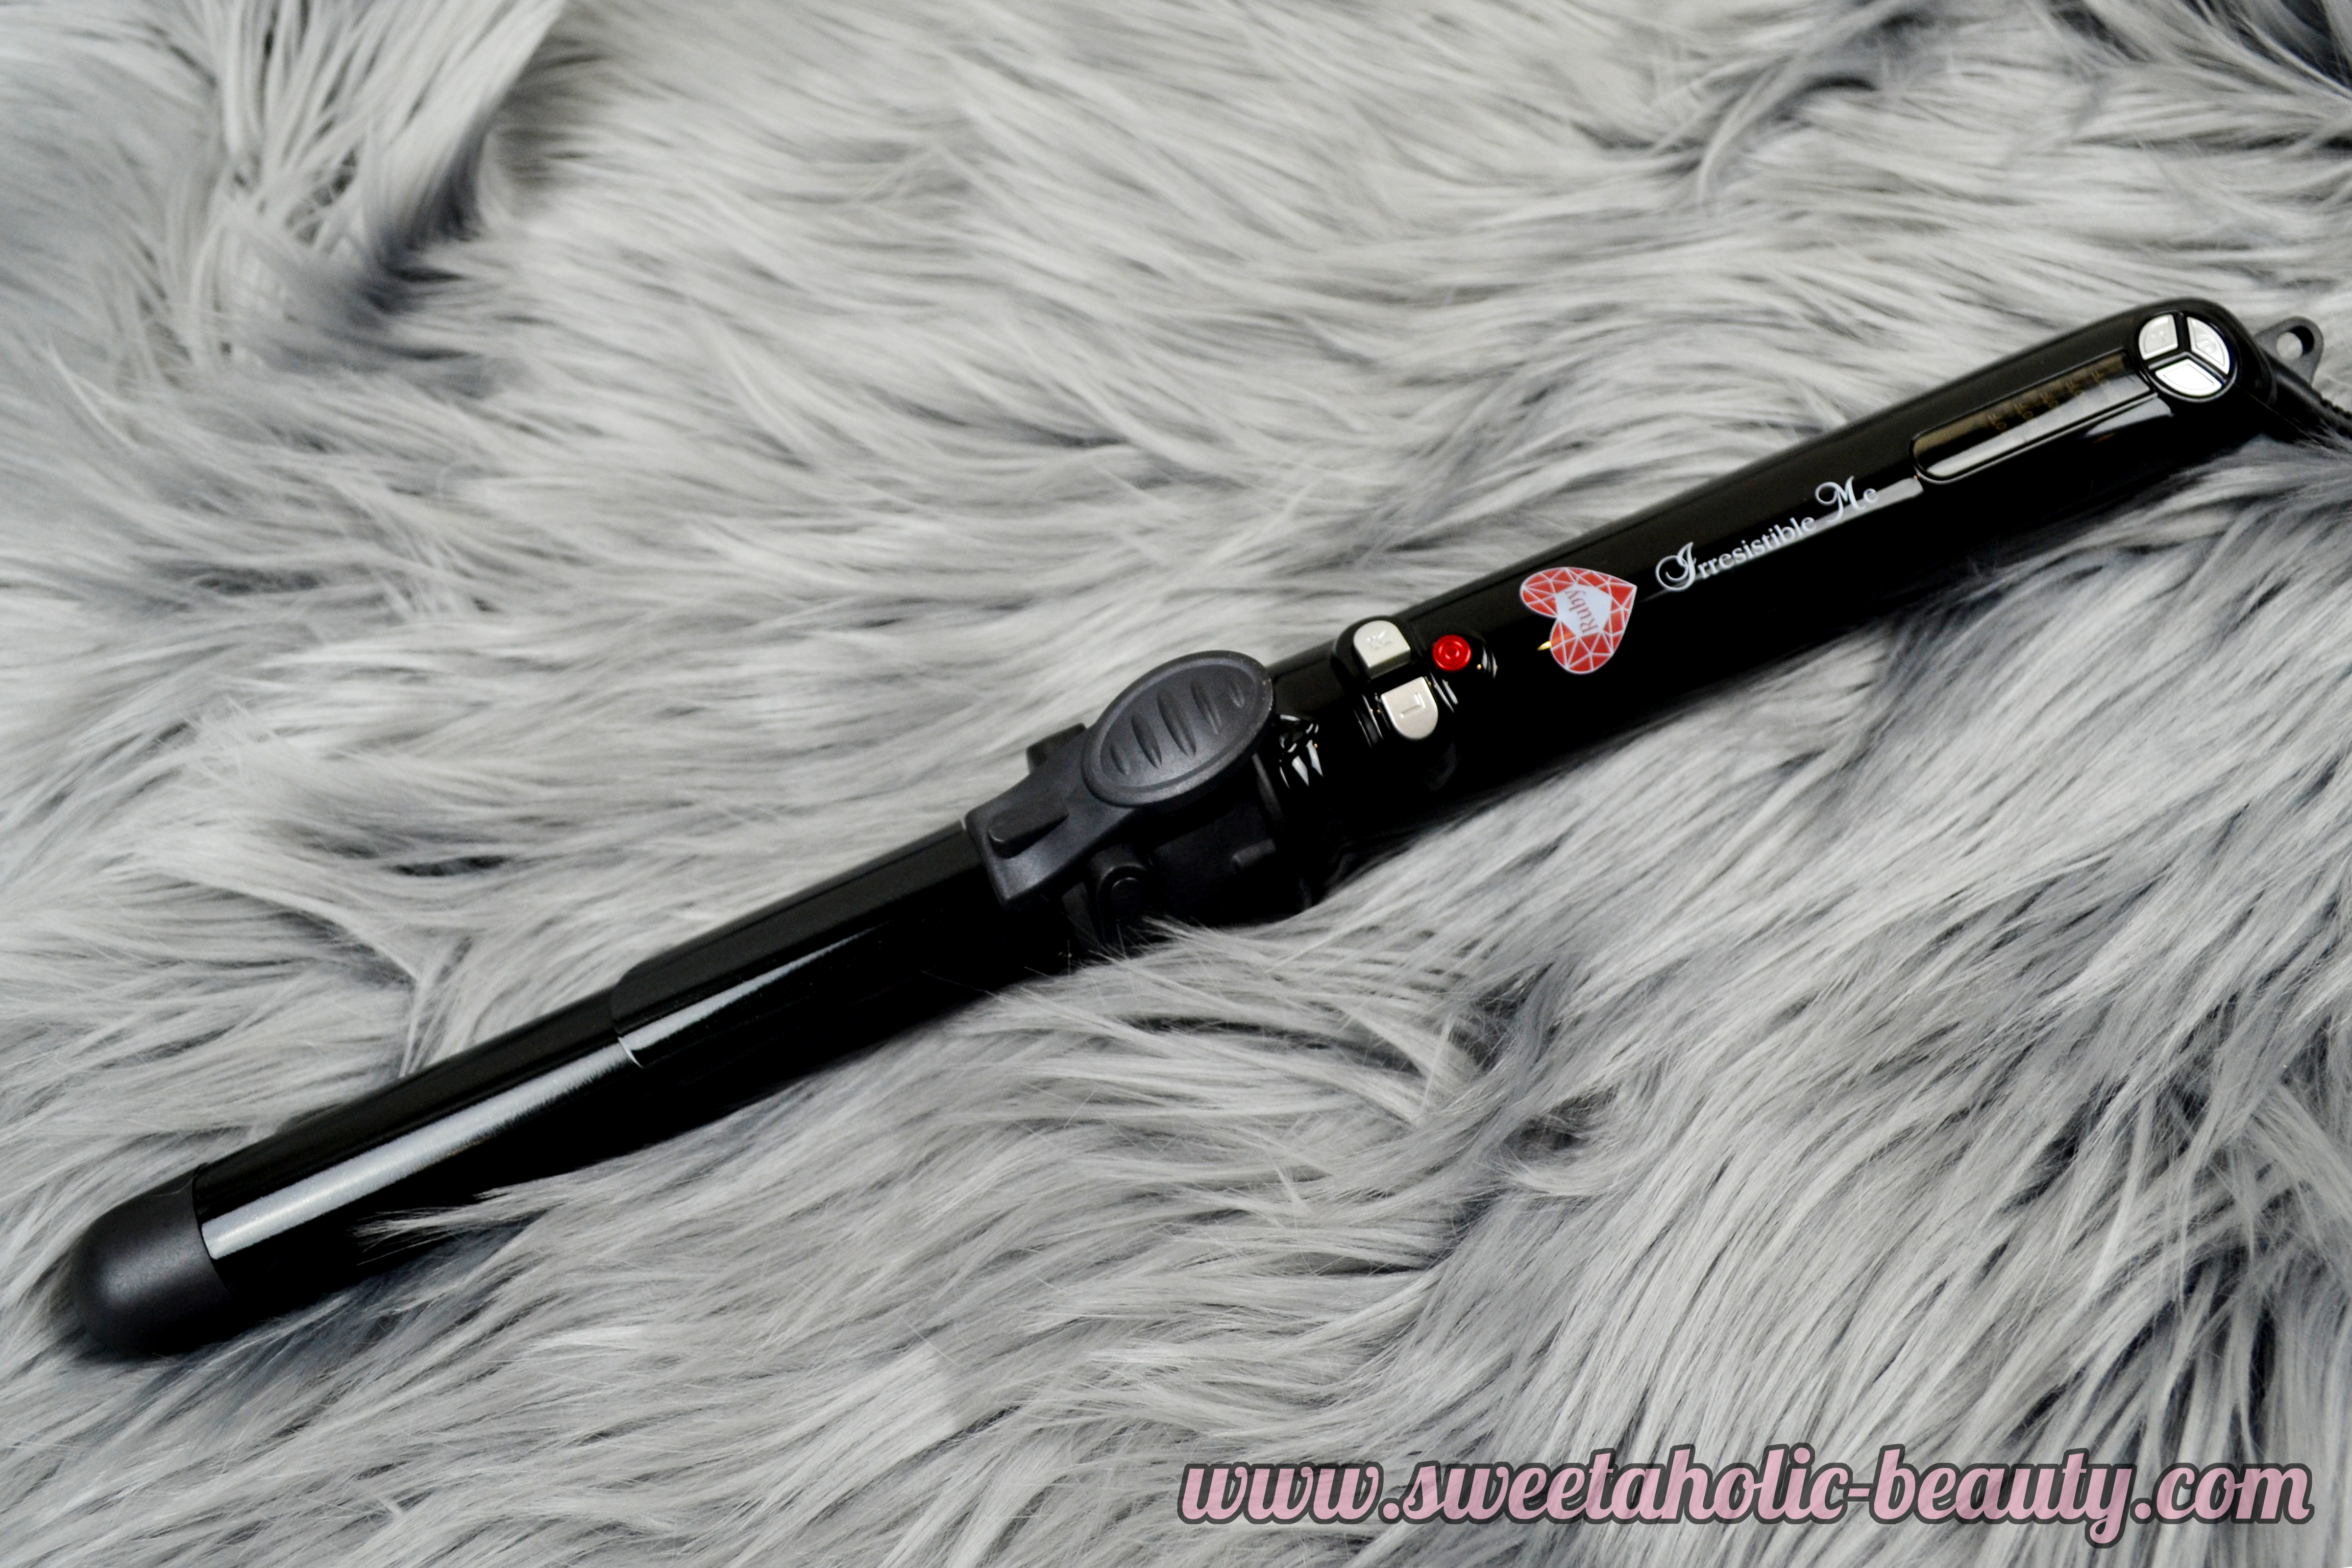 Irresistible Me Ruby Auto-Rotating Curling Iron Trialled & Tested - Sweetaholic Beauty